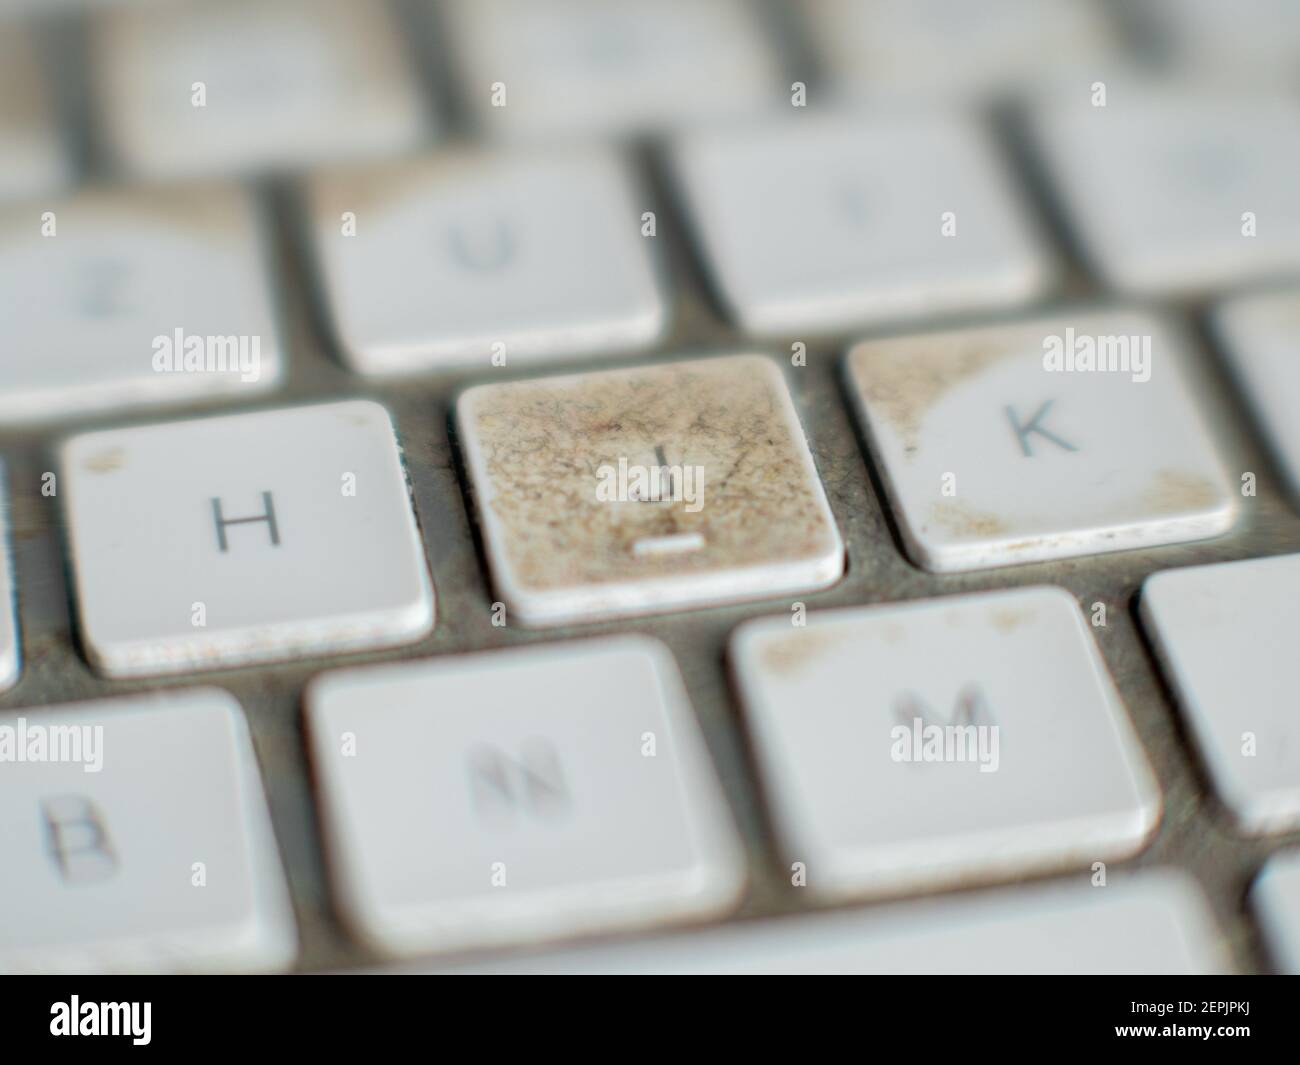 Very dirty white wireless computer keyboard with button J in focus Stock Photo